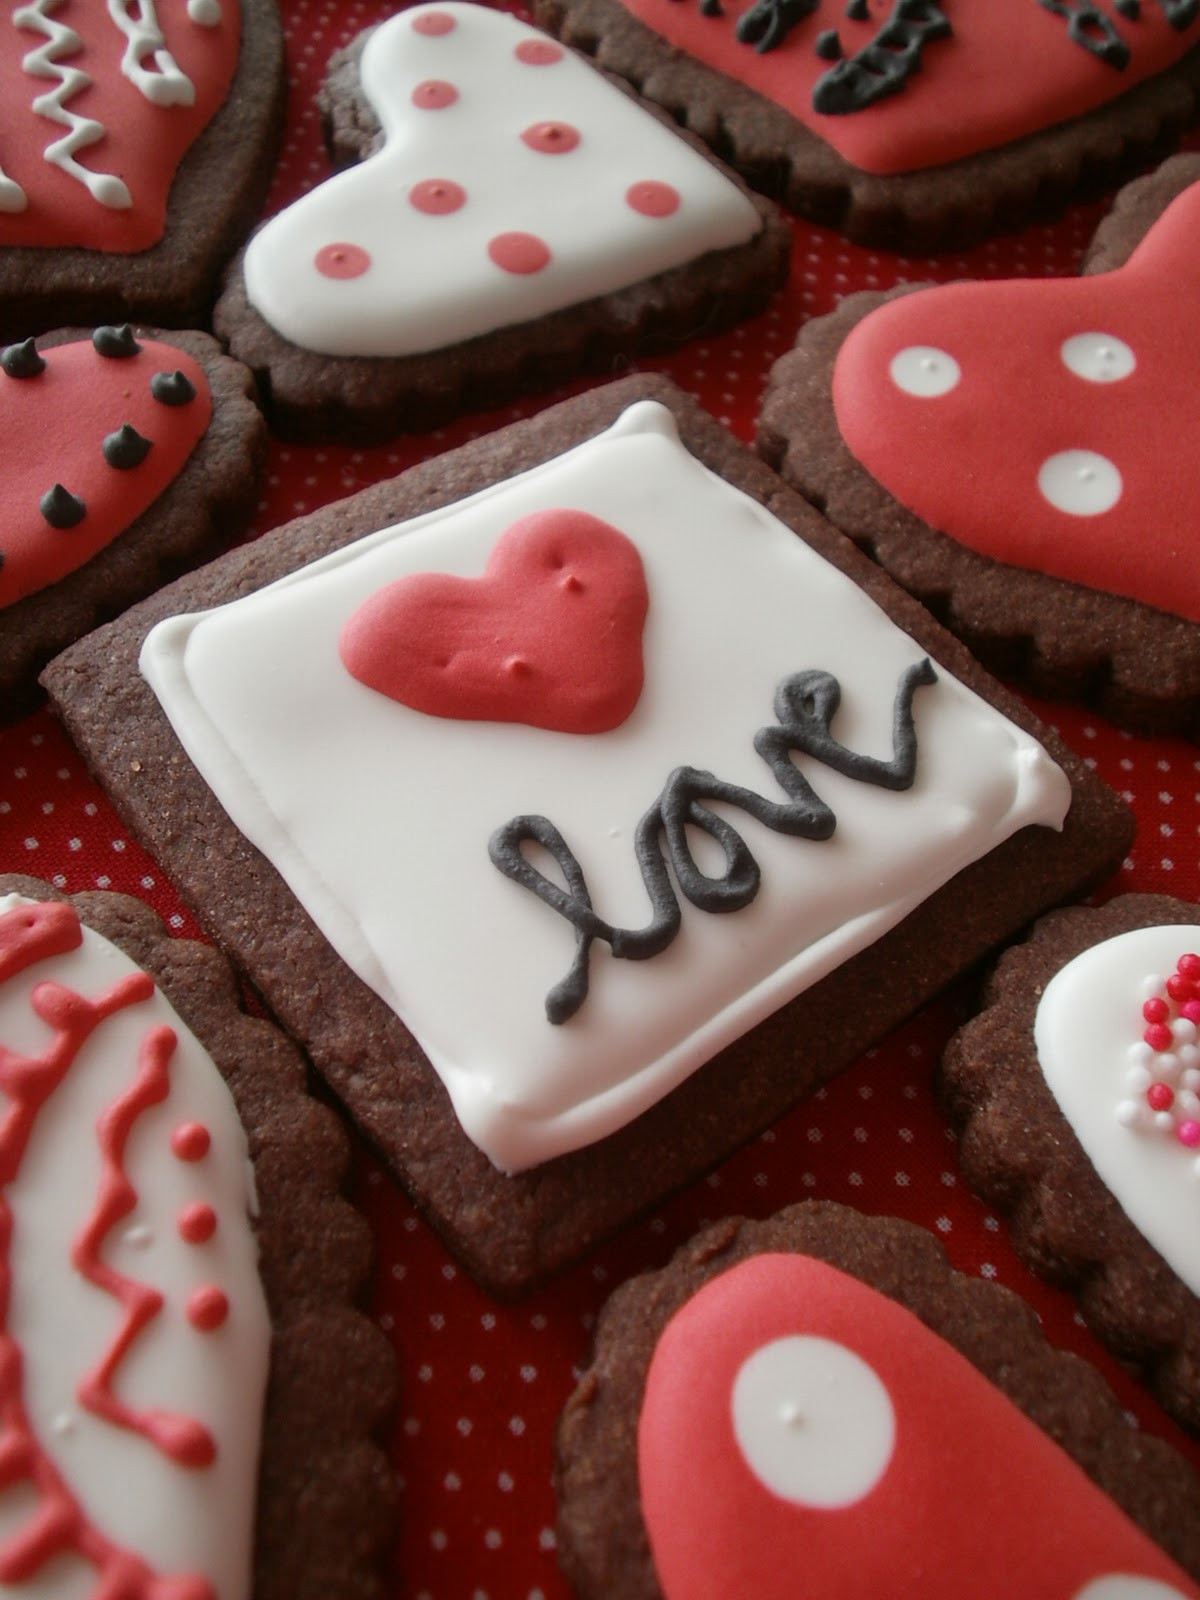 Valentine Cut Out Cookies
 The Busty Baker Valentine Brownie Cut Out Cookies